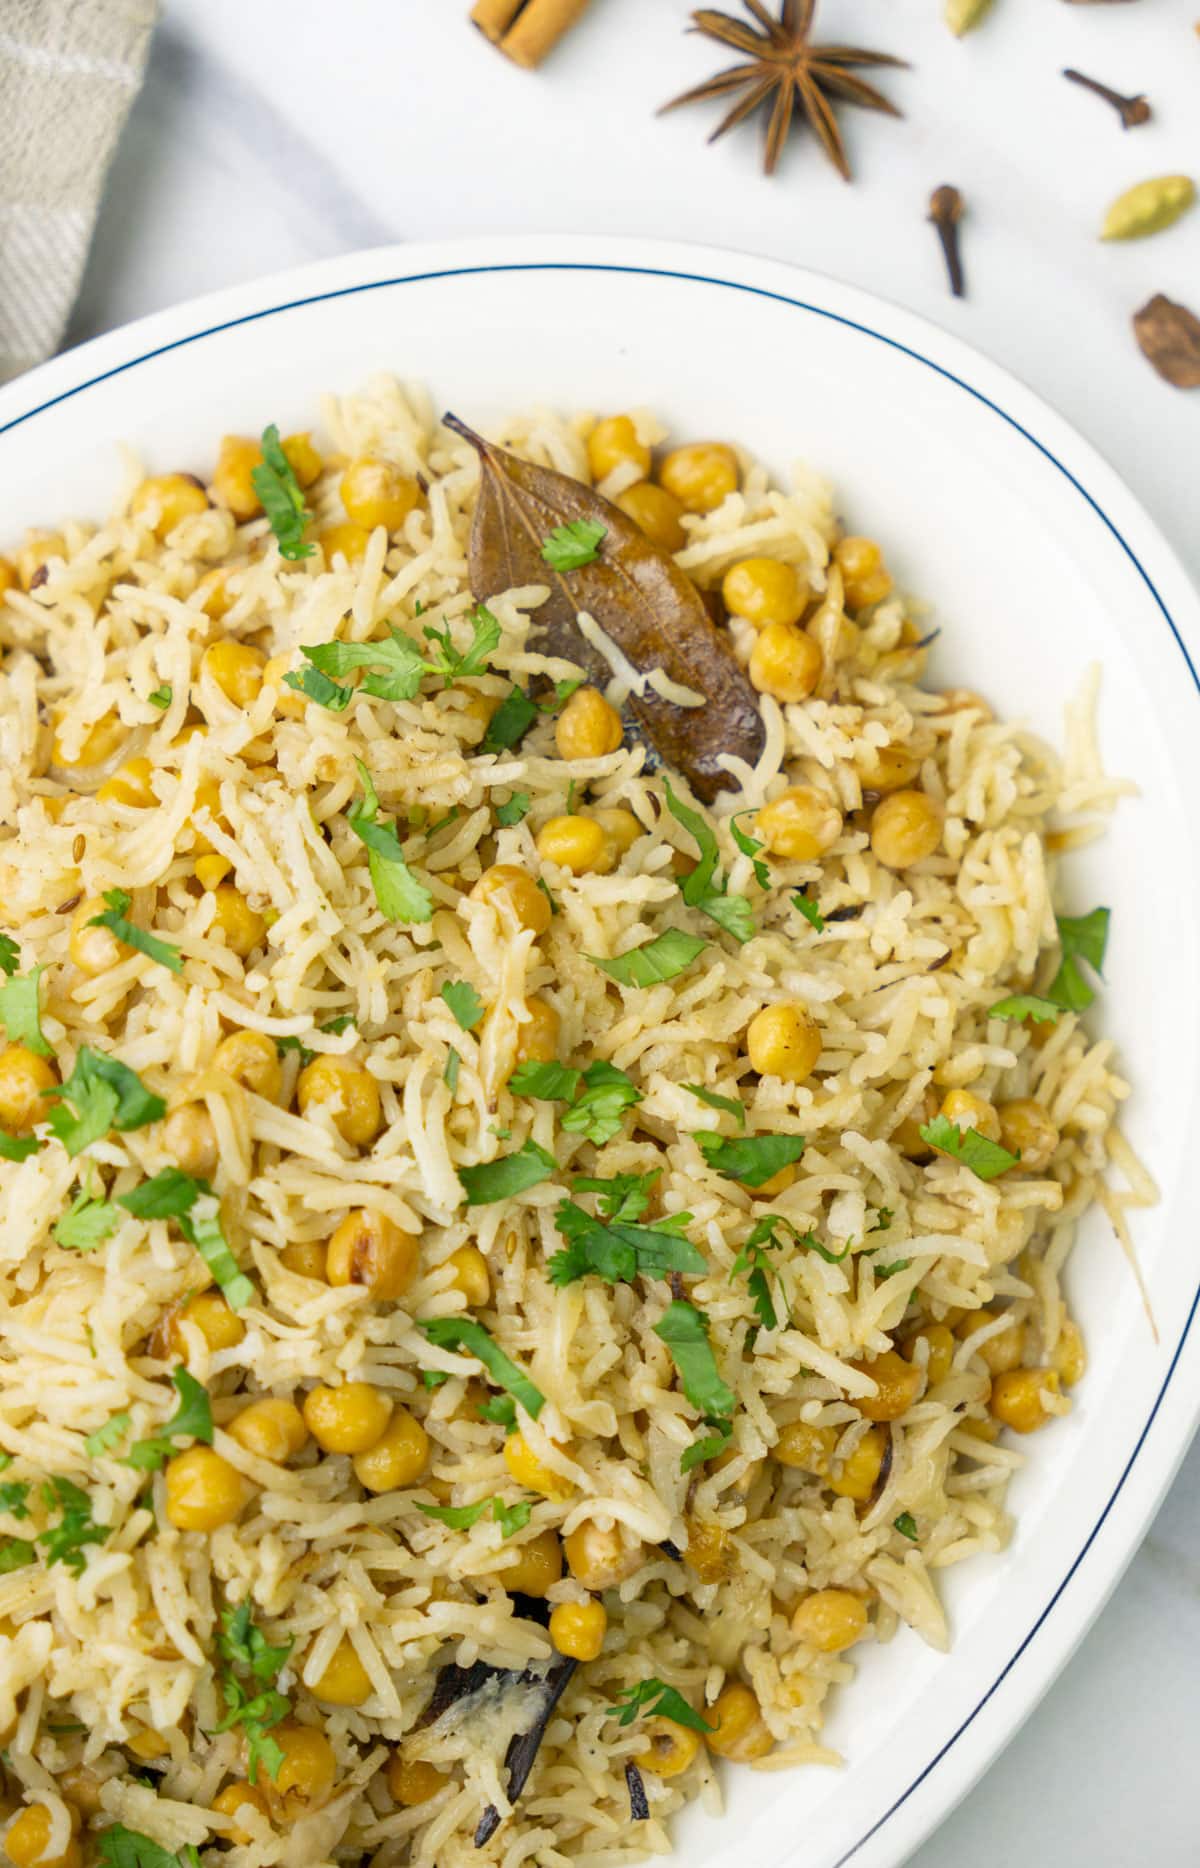 Chickpea Pulao garnished with cilantro leaves